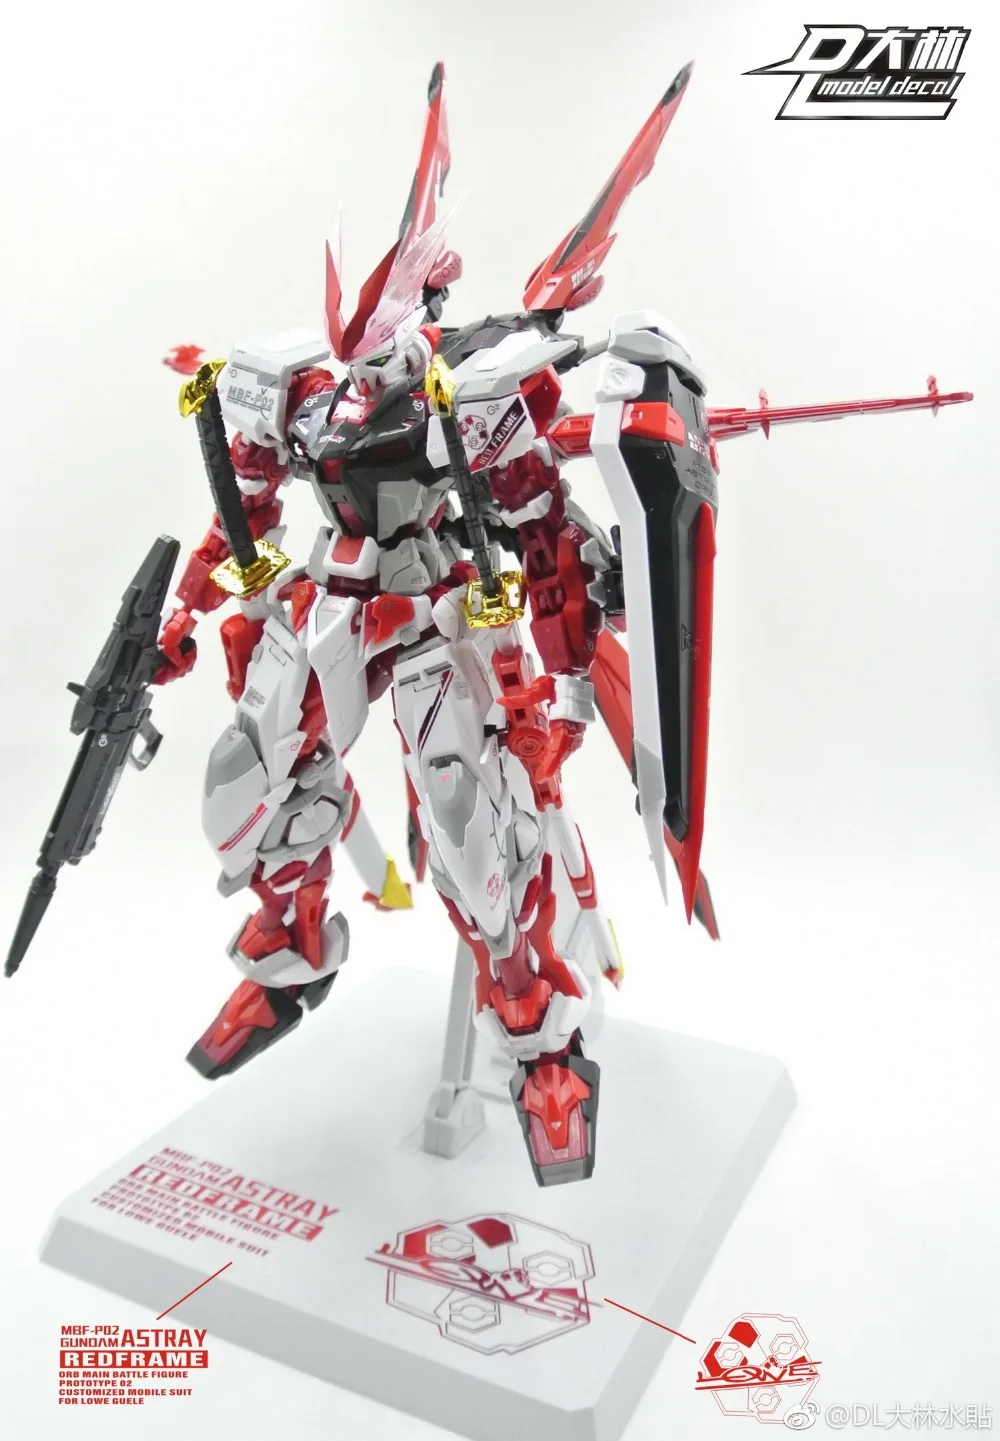 D.L Plating red Decal water paste For Bandai MG Red Frame backpack stand Gundam*